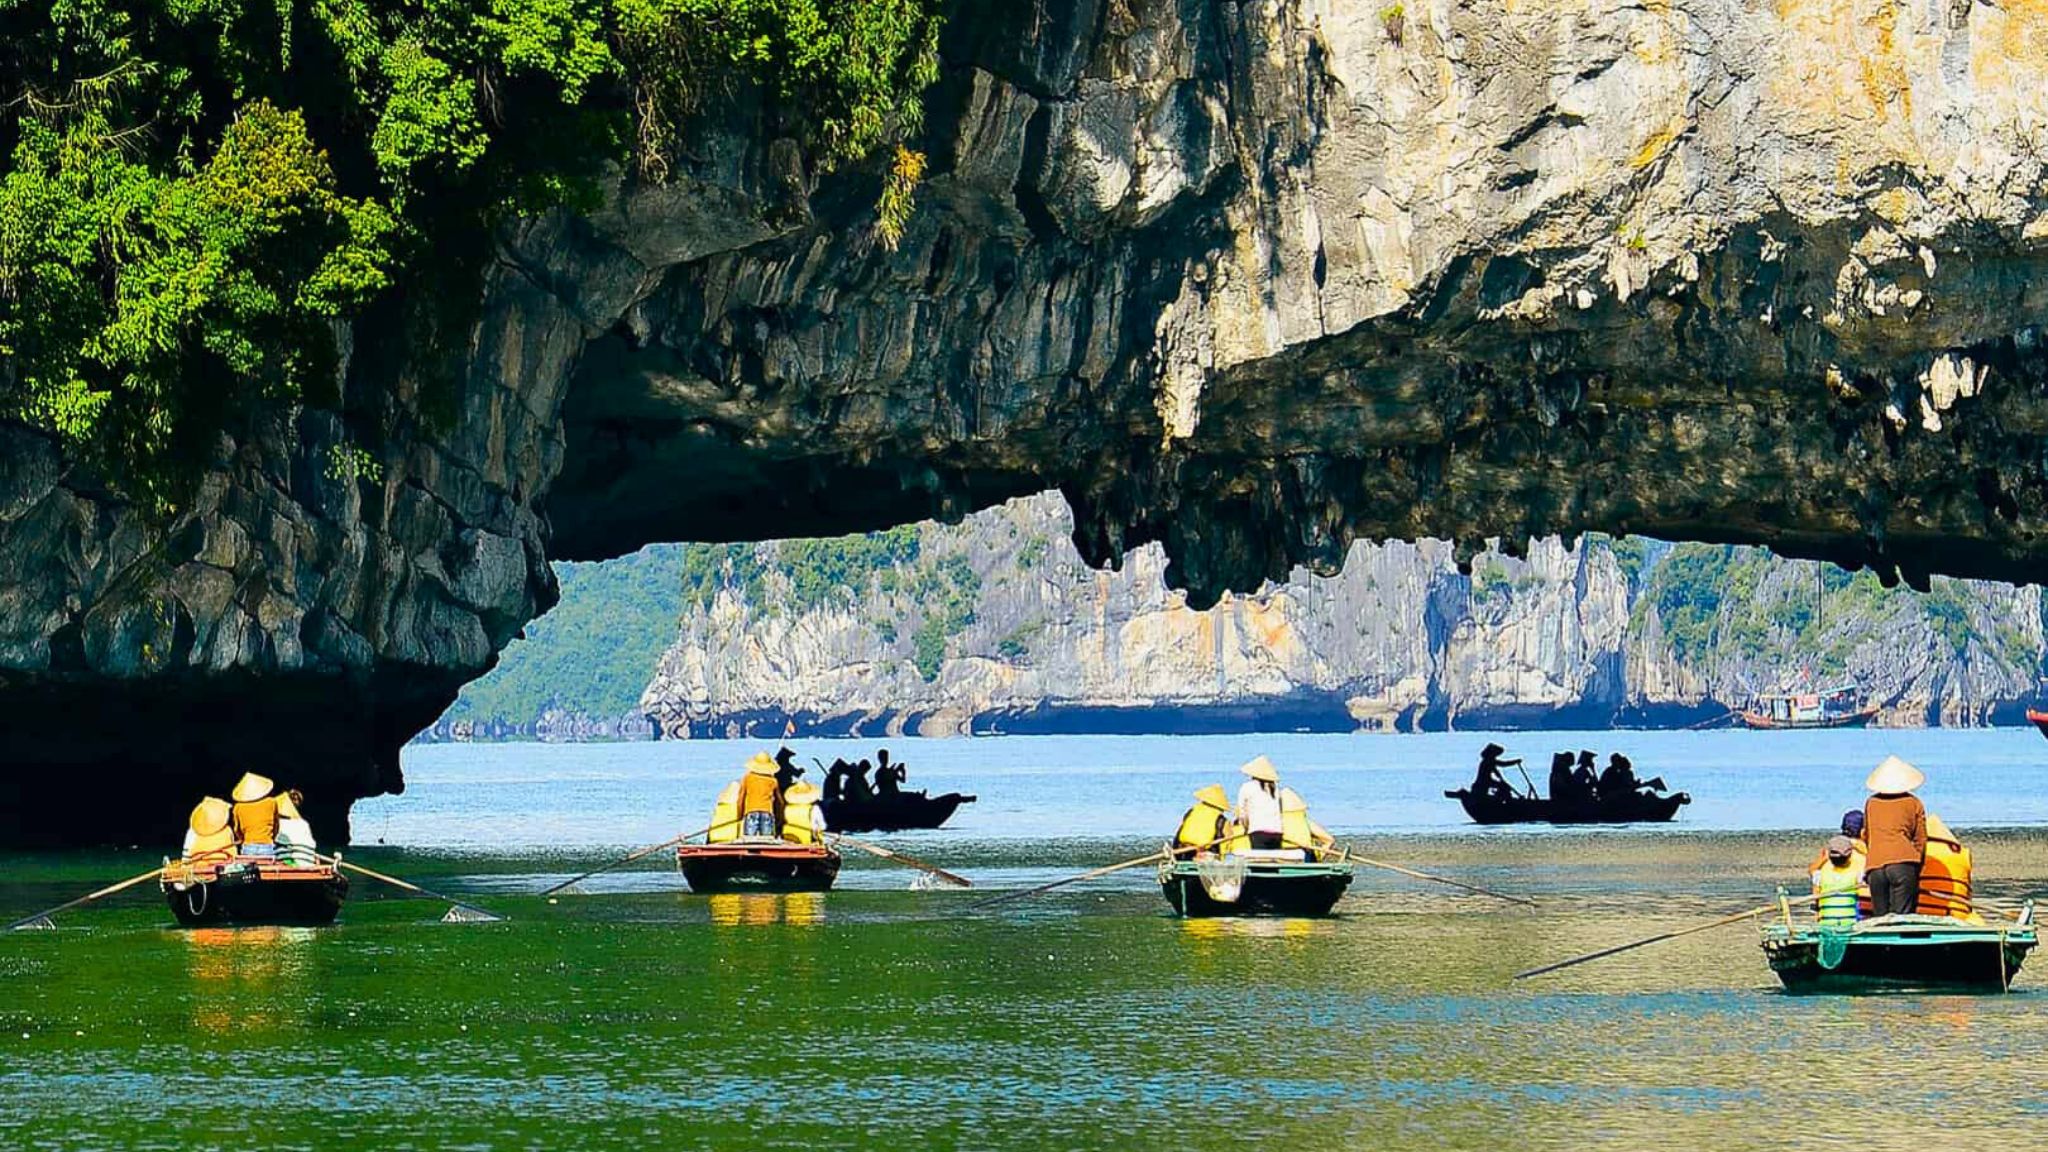 Join An Exciting Kayaking Trip Through Luon Cave